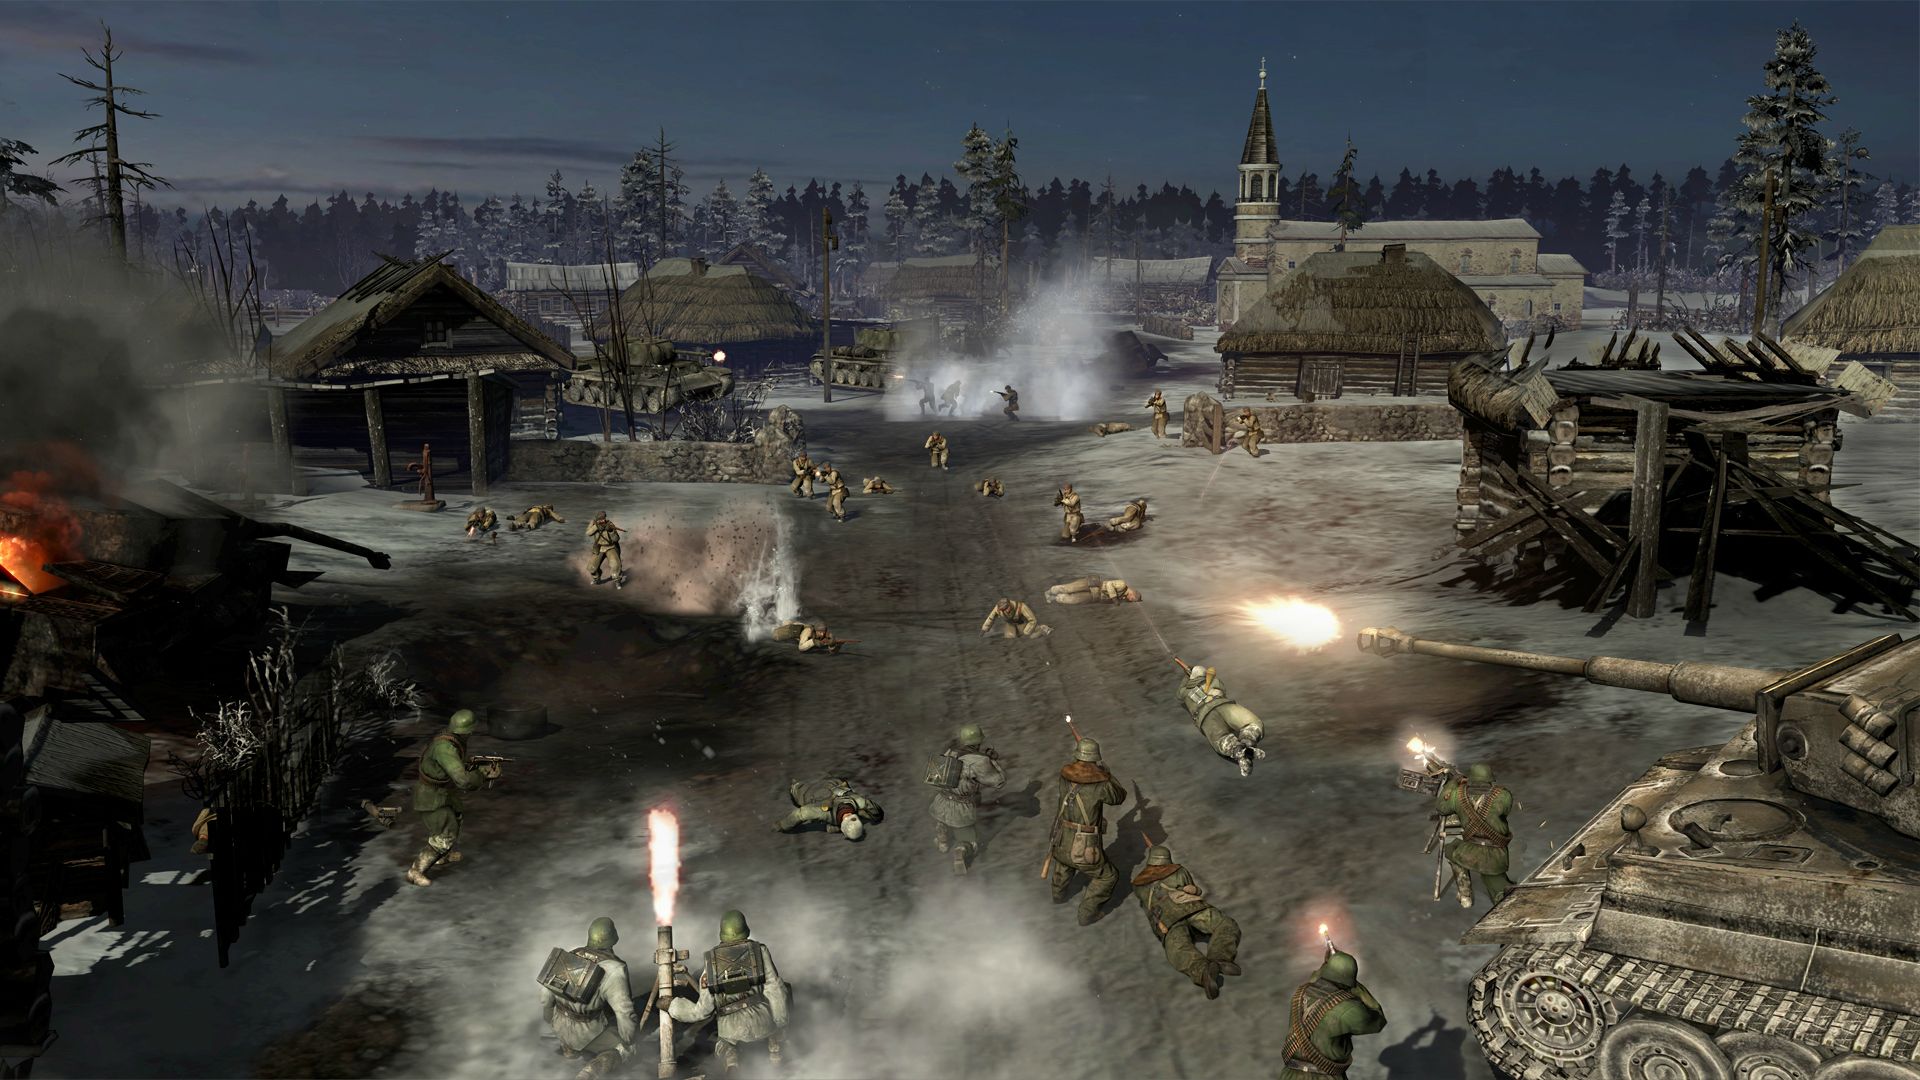 Media asset in full size related to 3dfxzone.it news item entitled as follows: THQ mostra nuovi screenshot del game RTS Company of Heroes 2 | Image Name: news17865_Company-of-heroes-2-screenshot_2.jpg